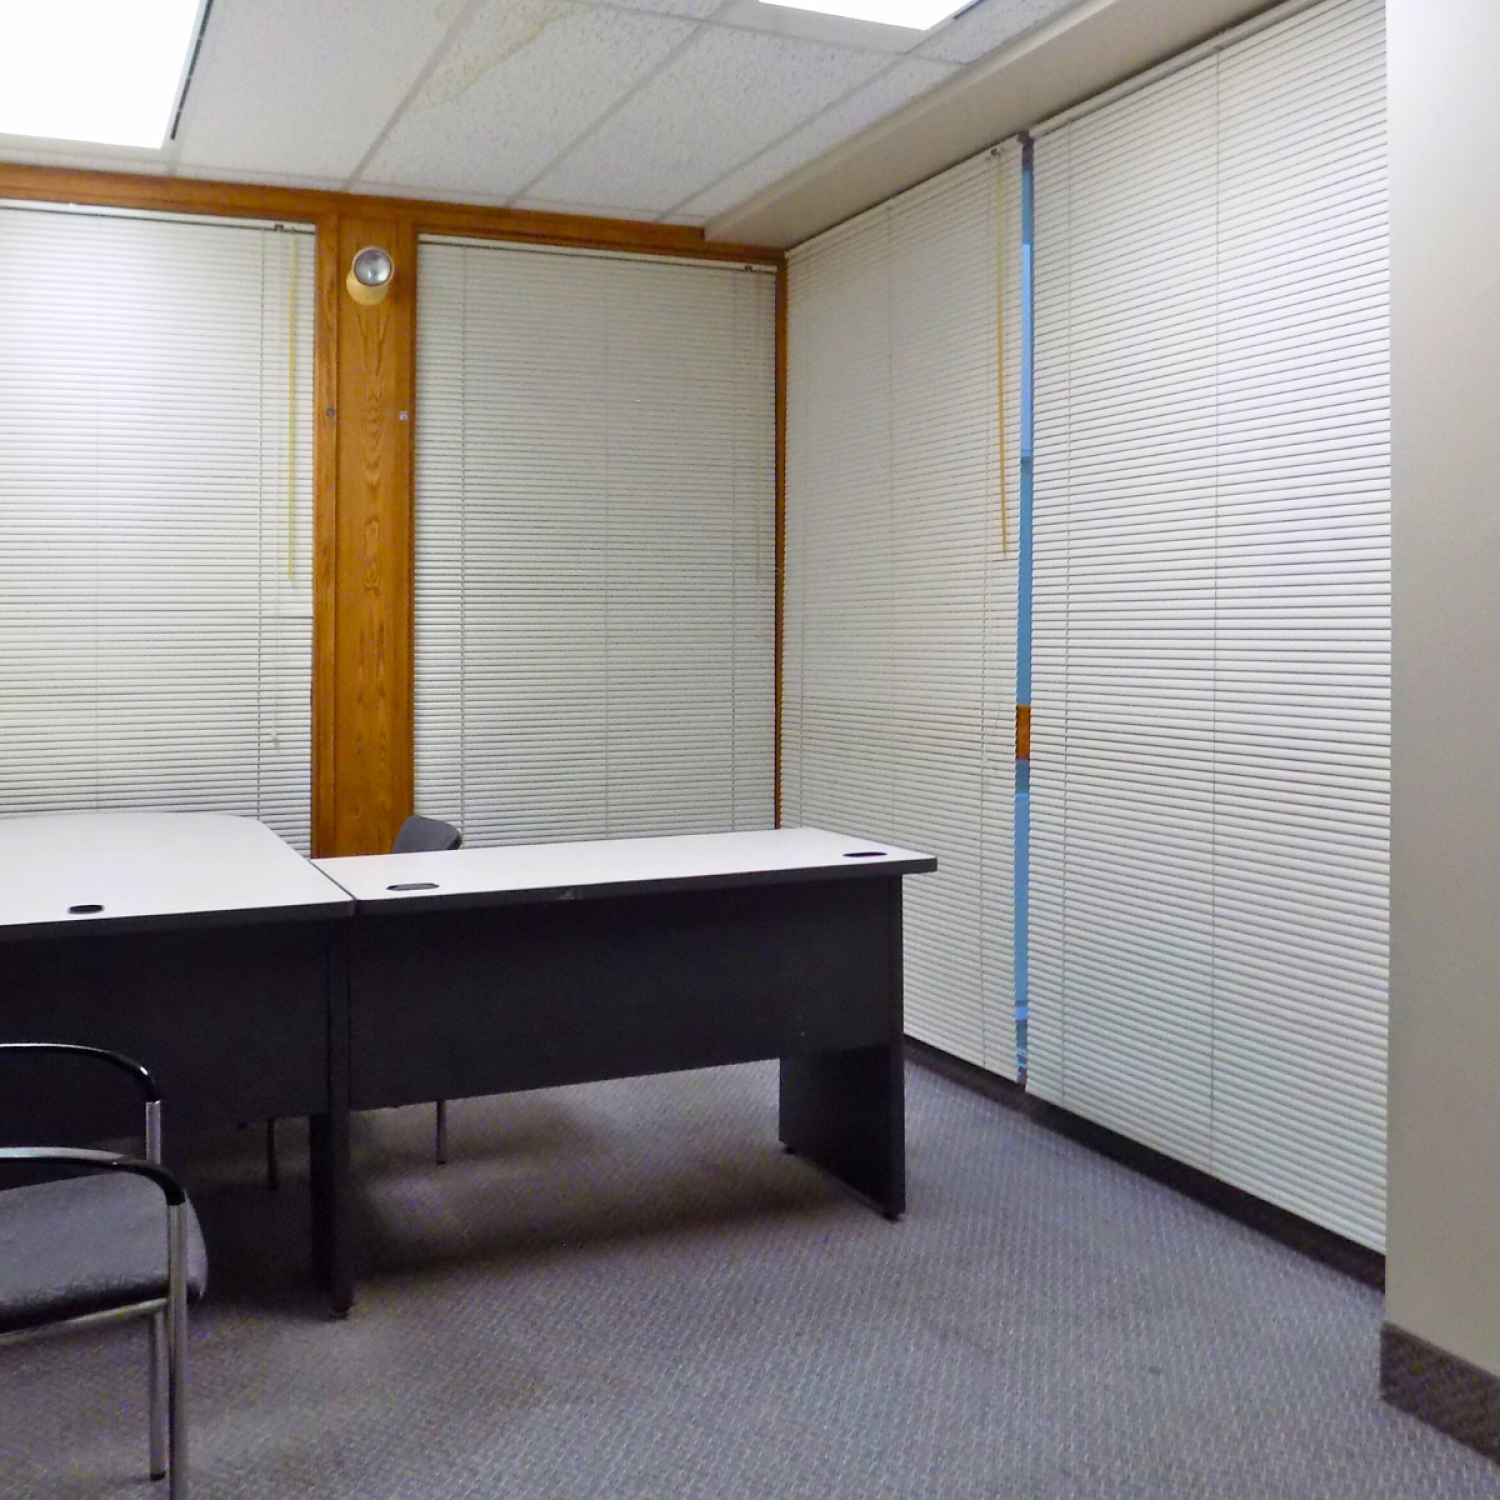 Equity Rentals Commercial Office Space for Lease